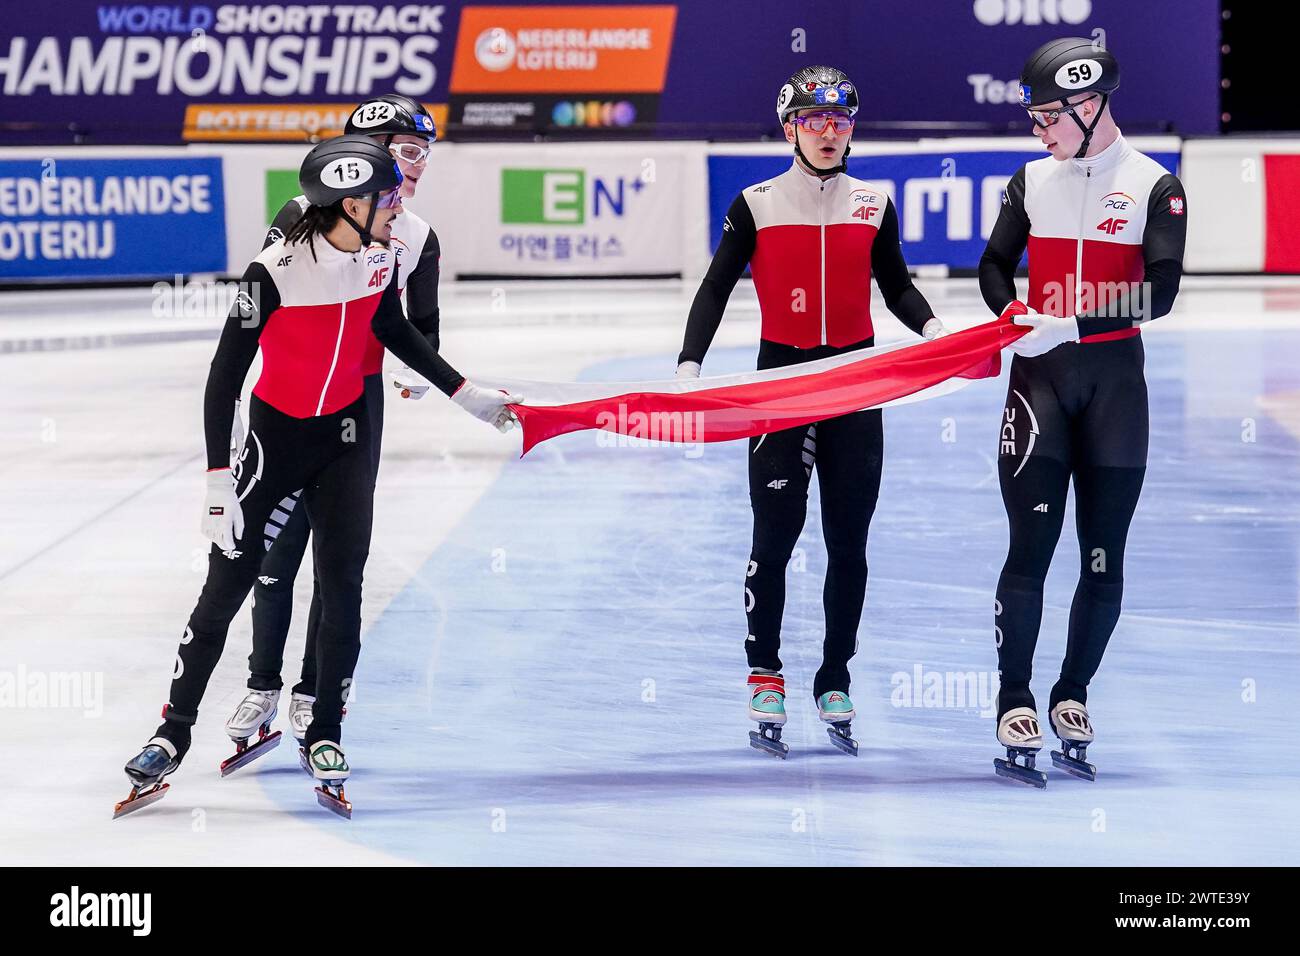 Rotterdam, Netherlands. 17th Mar, 2024. ROTTERDAM, NETHERLANDS - MARCH 17: Felix Pigeon of Poland, Diane Sellier of Poland, Michal Niewinski of Poland, Lukasz Kuczynski of Poland celebrating brons medal after competing in the Men's Relay 5000m Final during Day 3 of the ISU World Short Track Speed Skating Championships 2024 at Ahoy on March 17, 2024 in Rotterdam, Netherlands. (Photo by Joris Verwijst/BSR Agency) Credit: BSR Agency/Alamy Live News Stock Photo